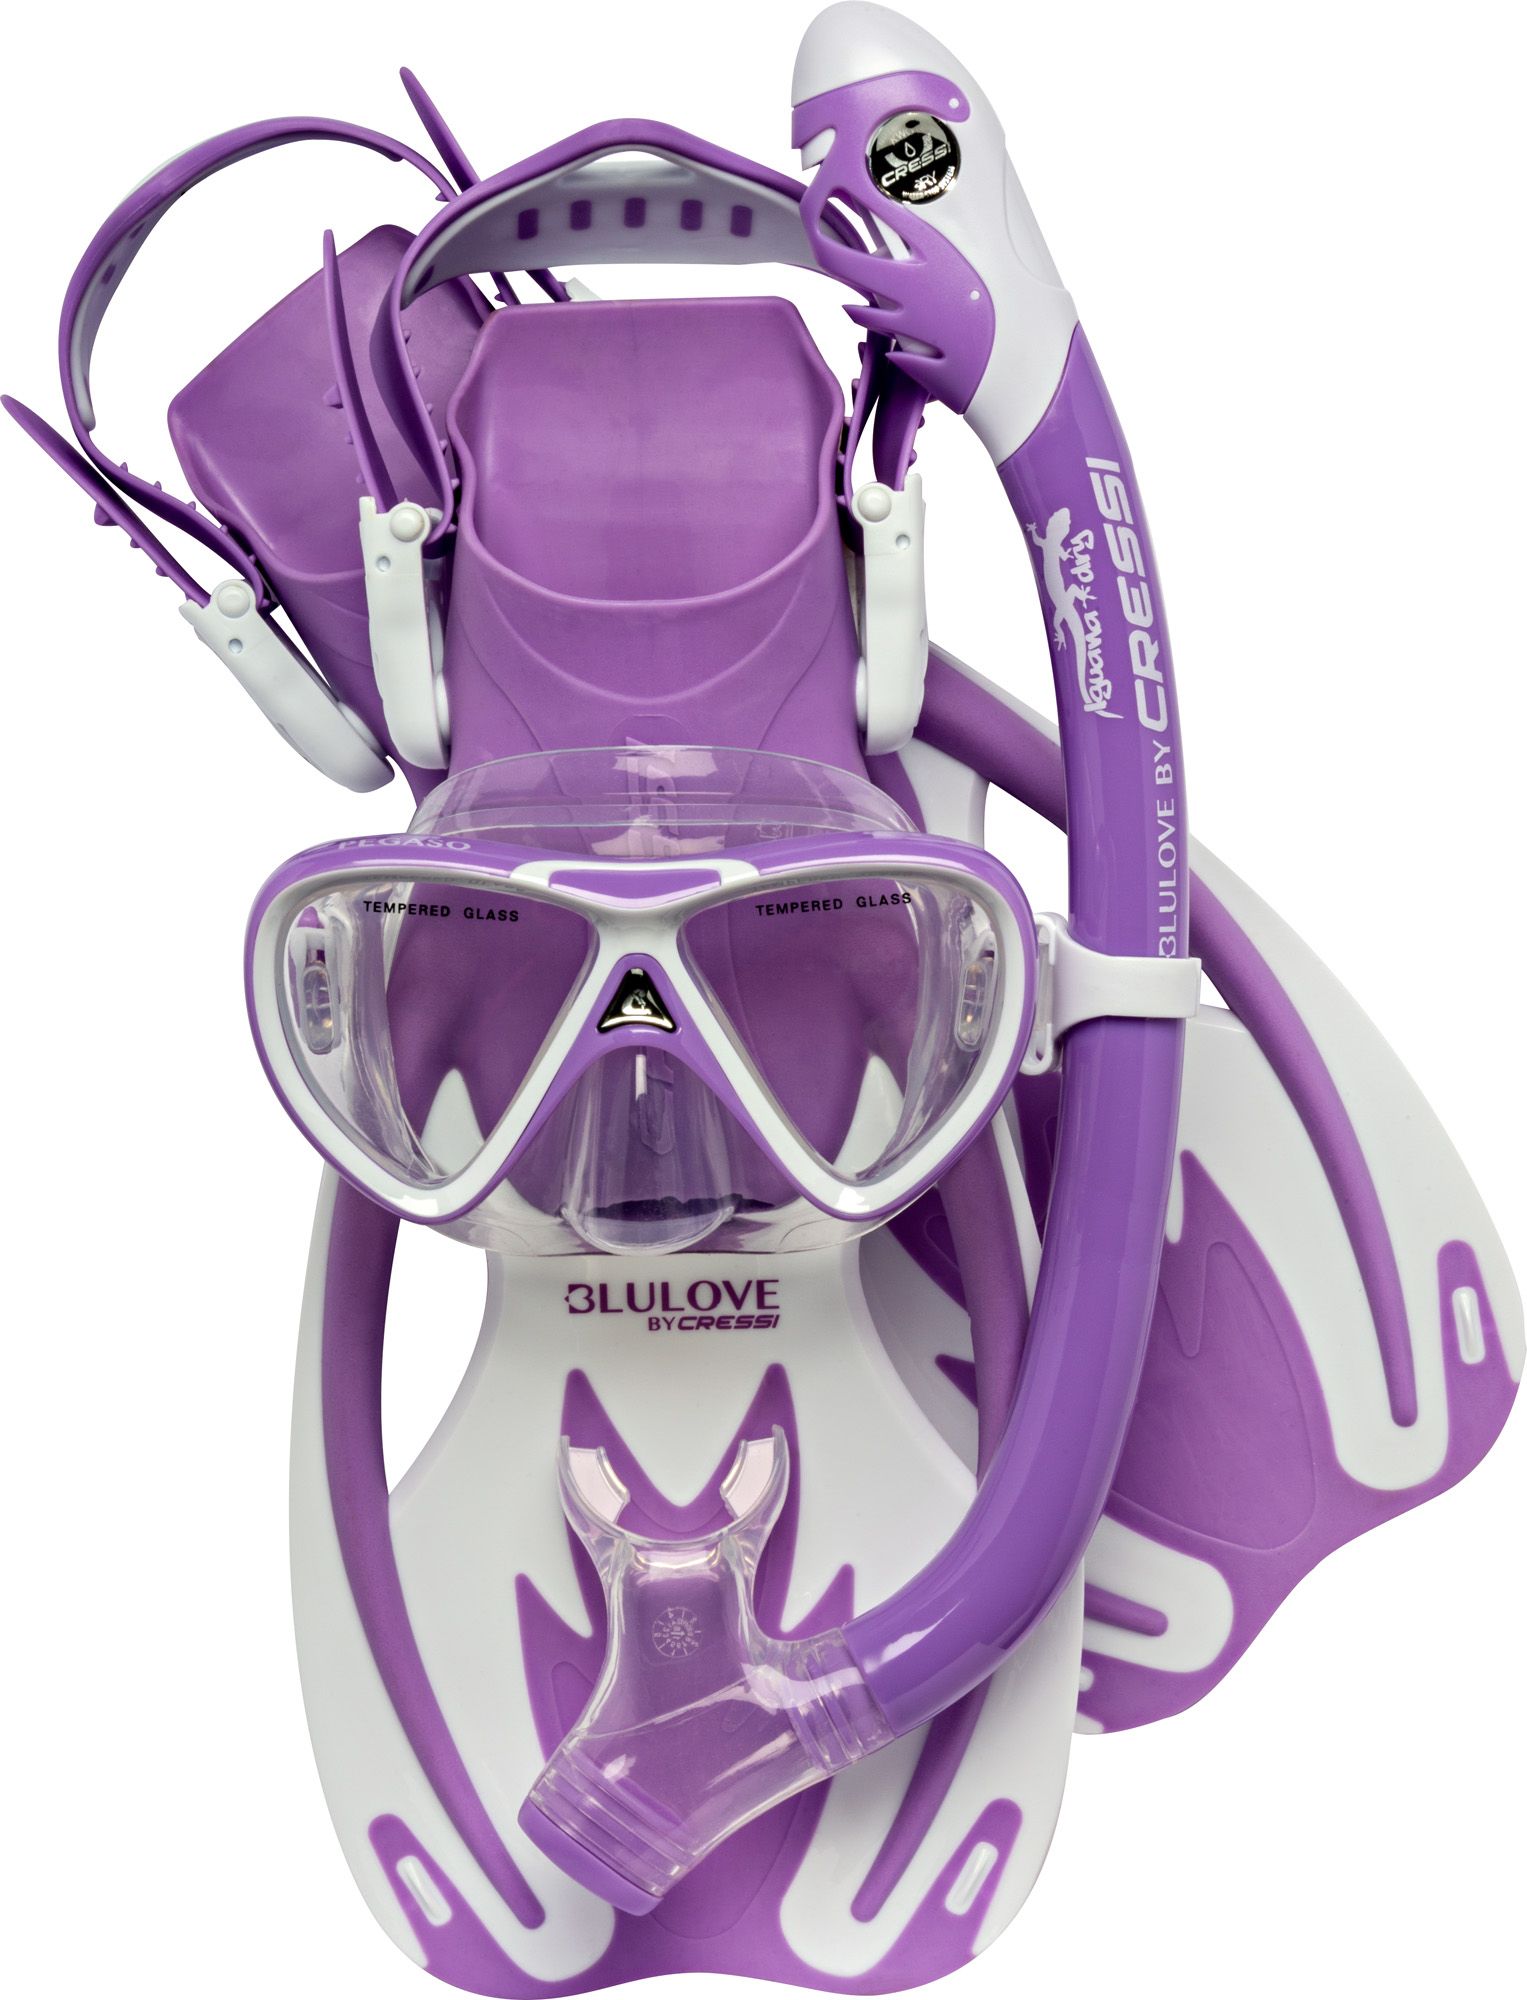 Photos - Diving Accessory Cressi Sub Cressi Youth Rocks Pro Dry Snorkeling Set, Kids, L/XL, Lilac/White 20CREGR 